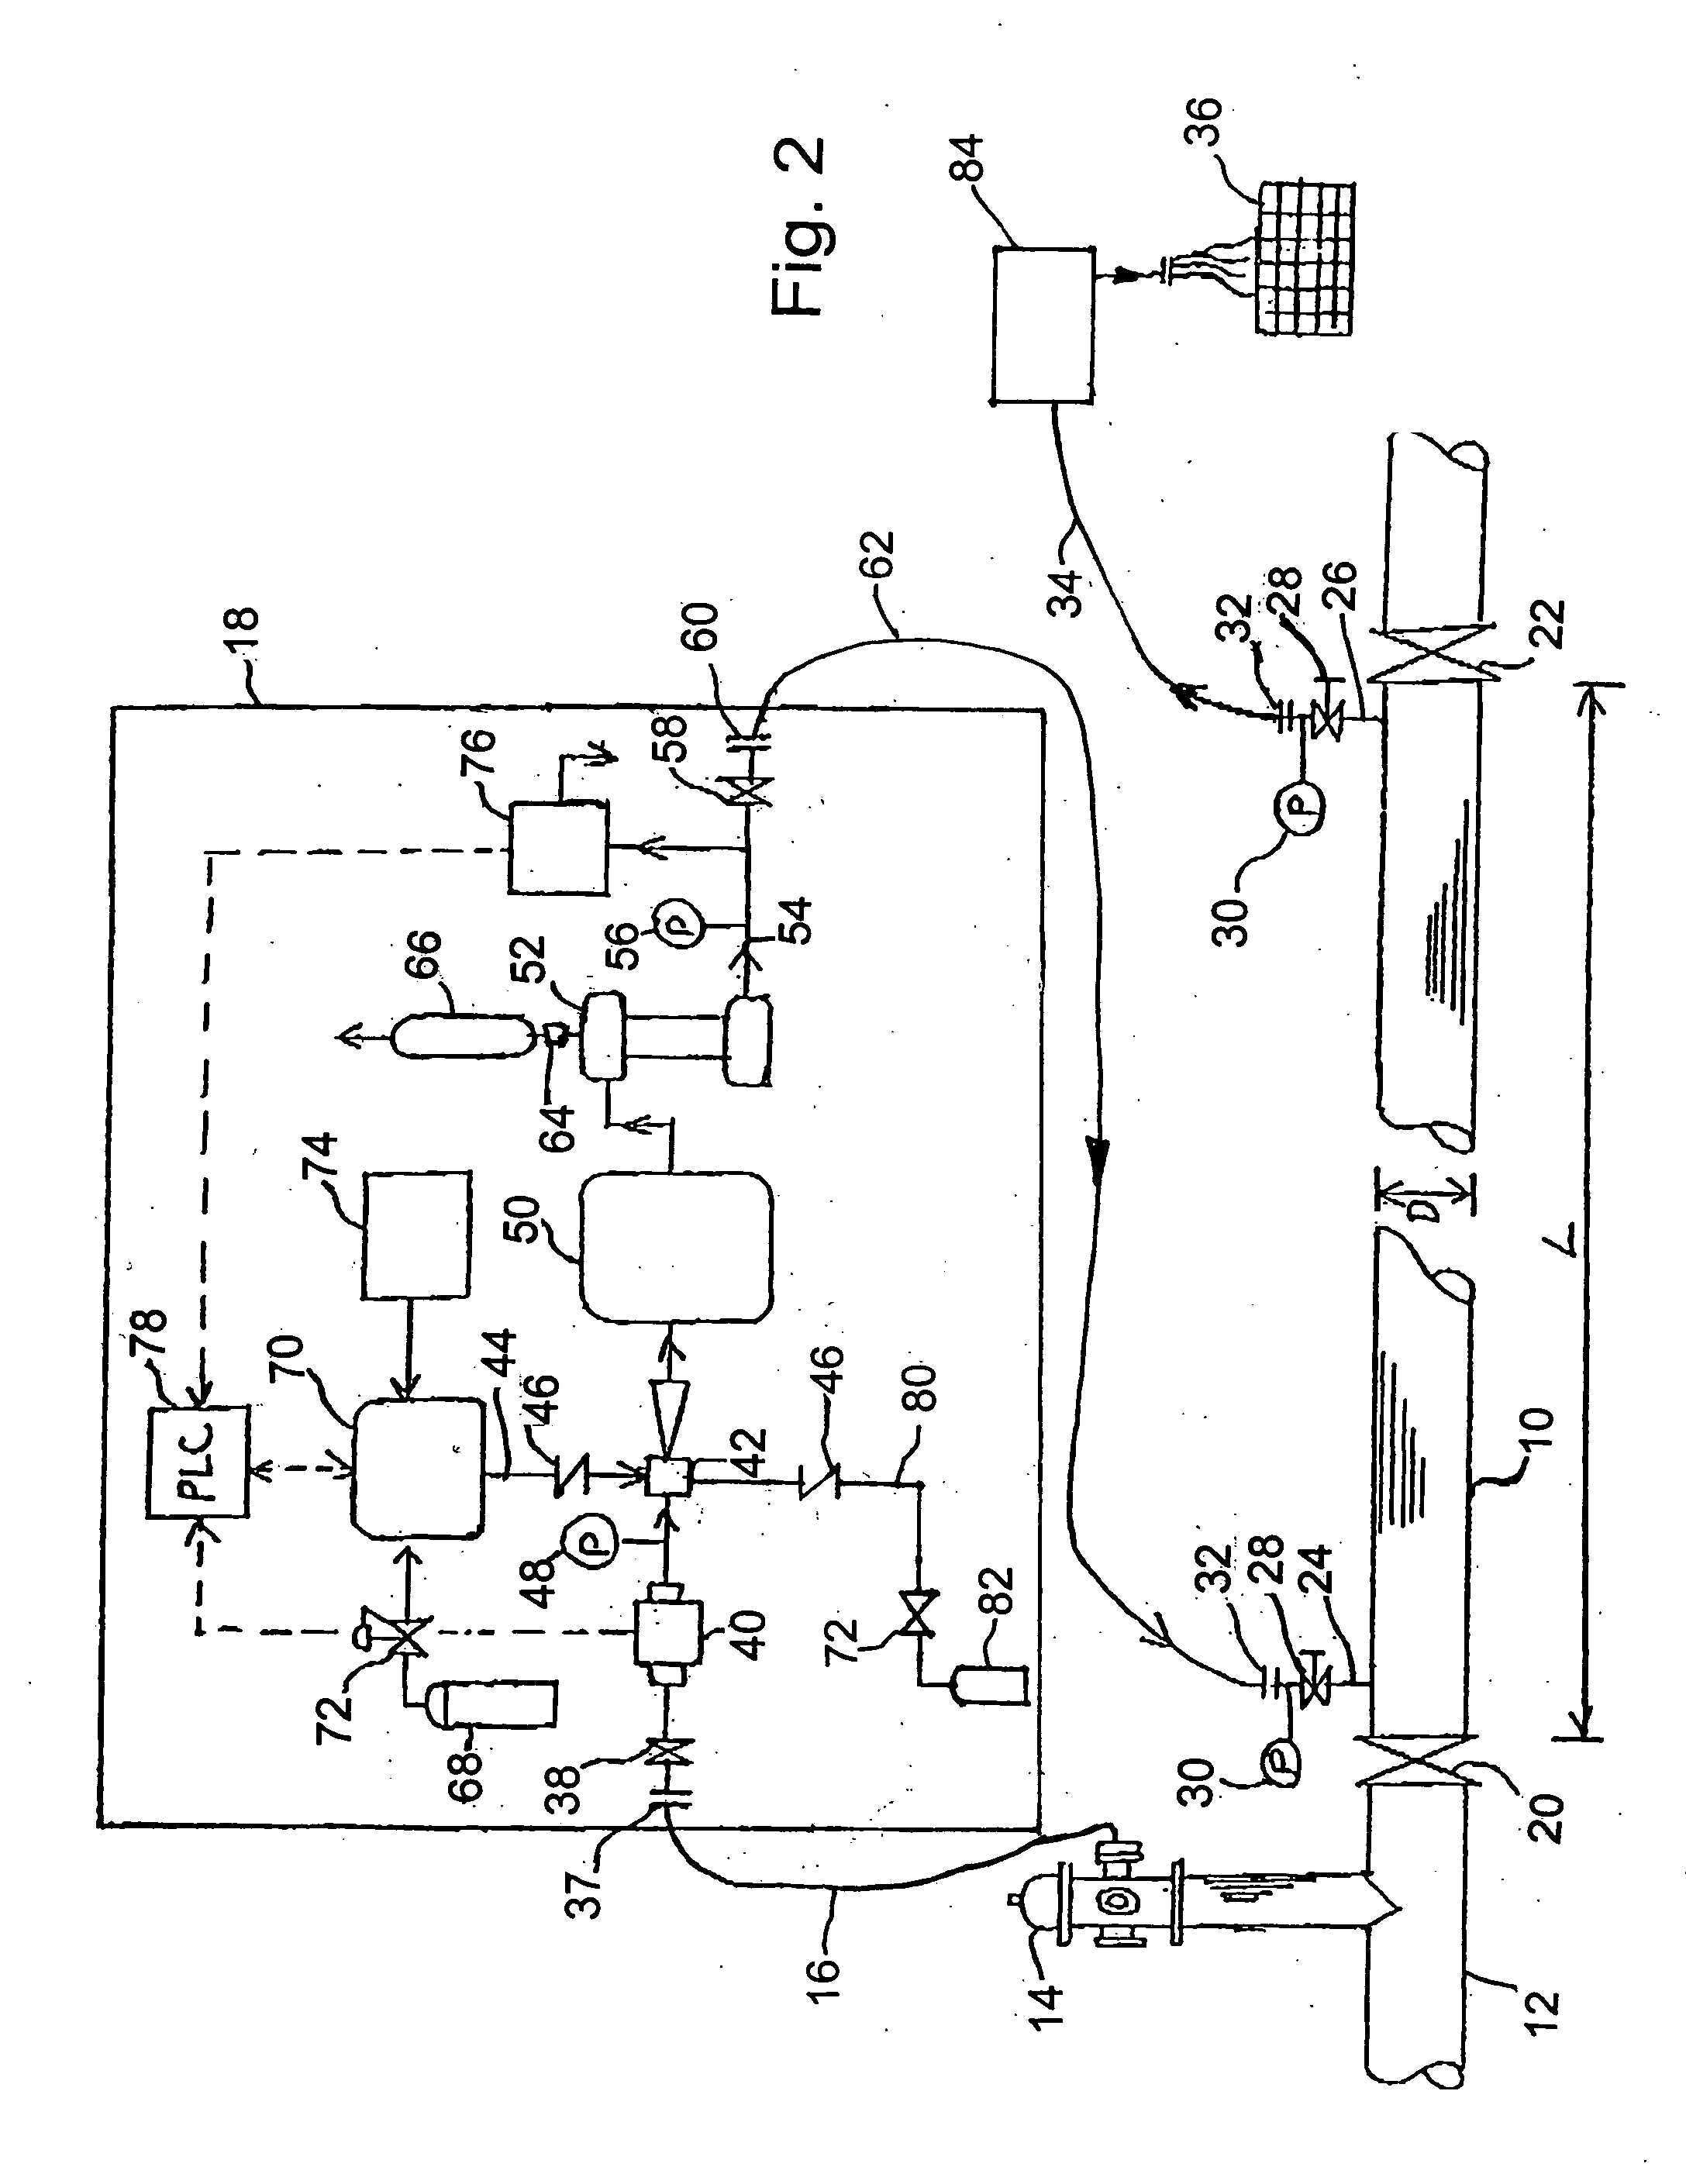 Method and apparatus for ozone disinfection of water supply pipelines